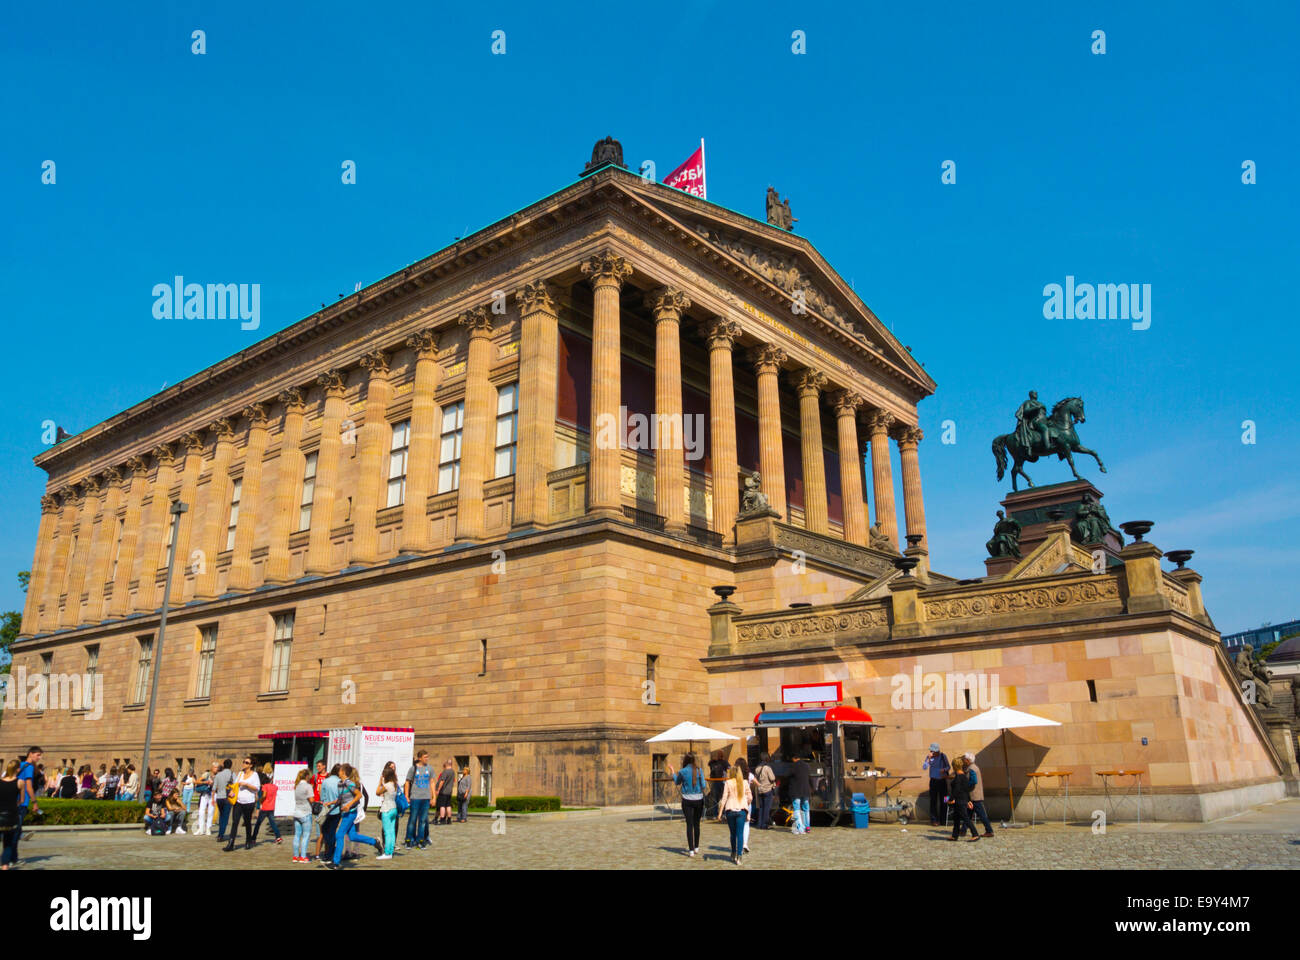 Alte Nationalgalerie, National Art Gallery, Museumsinsel, the museum island, Mitte district, central Berlin, Germany Stock Photo